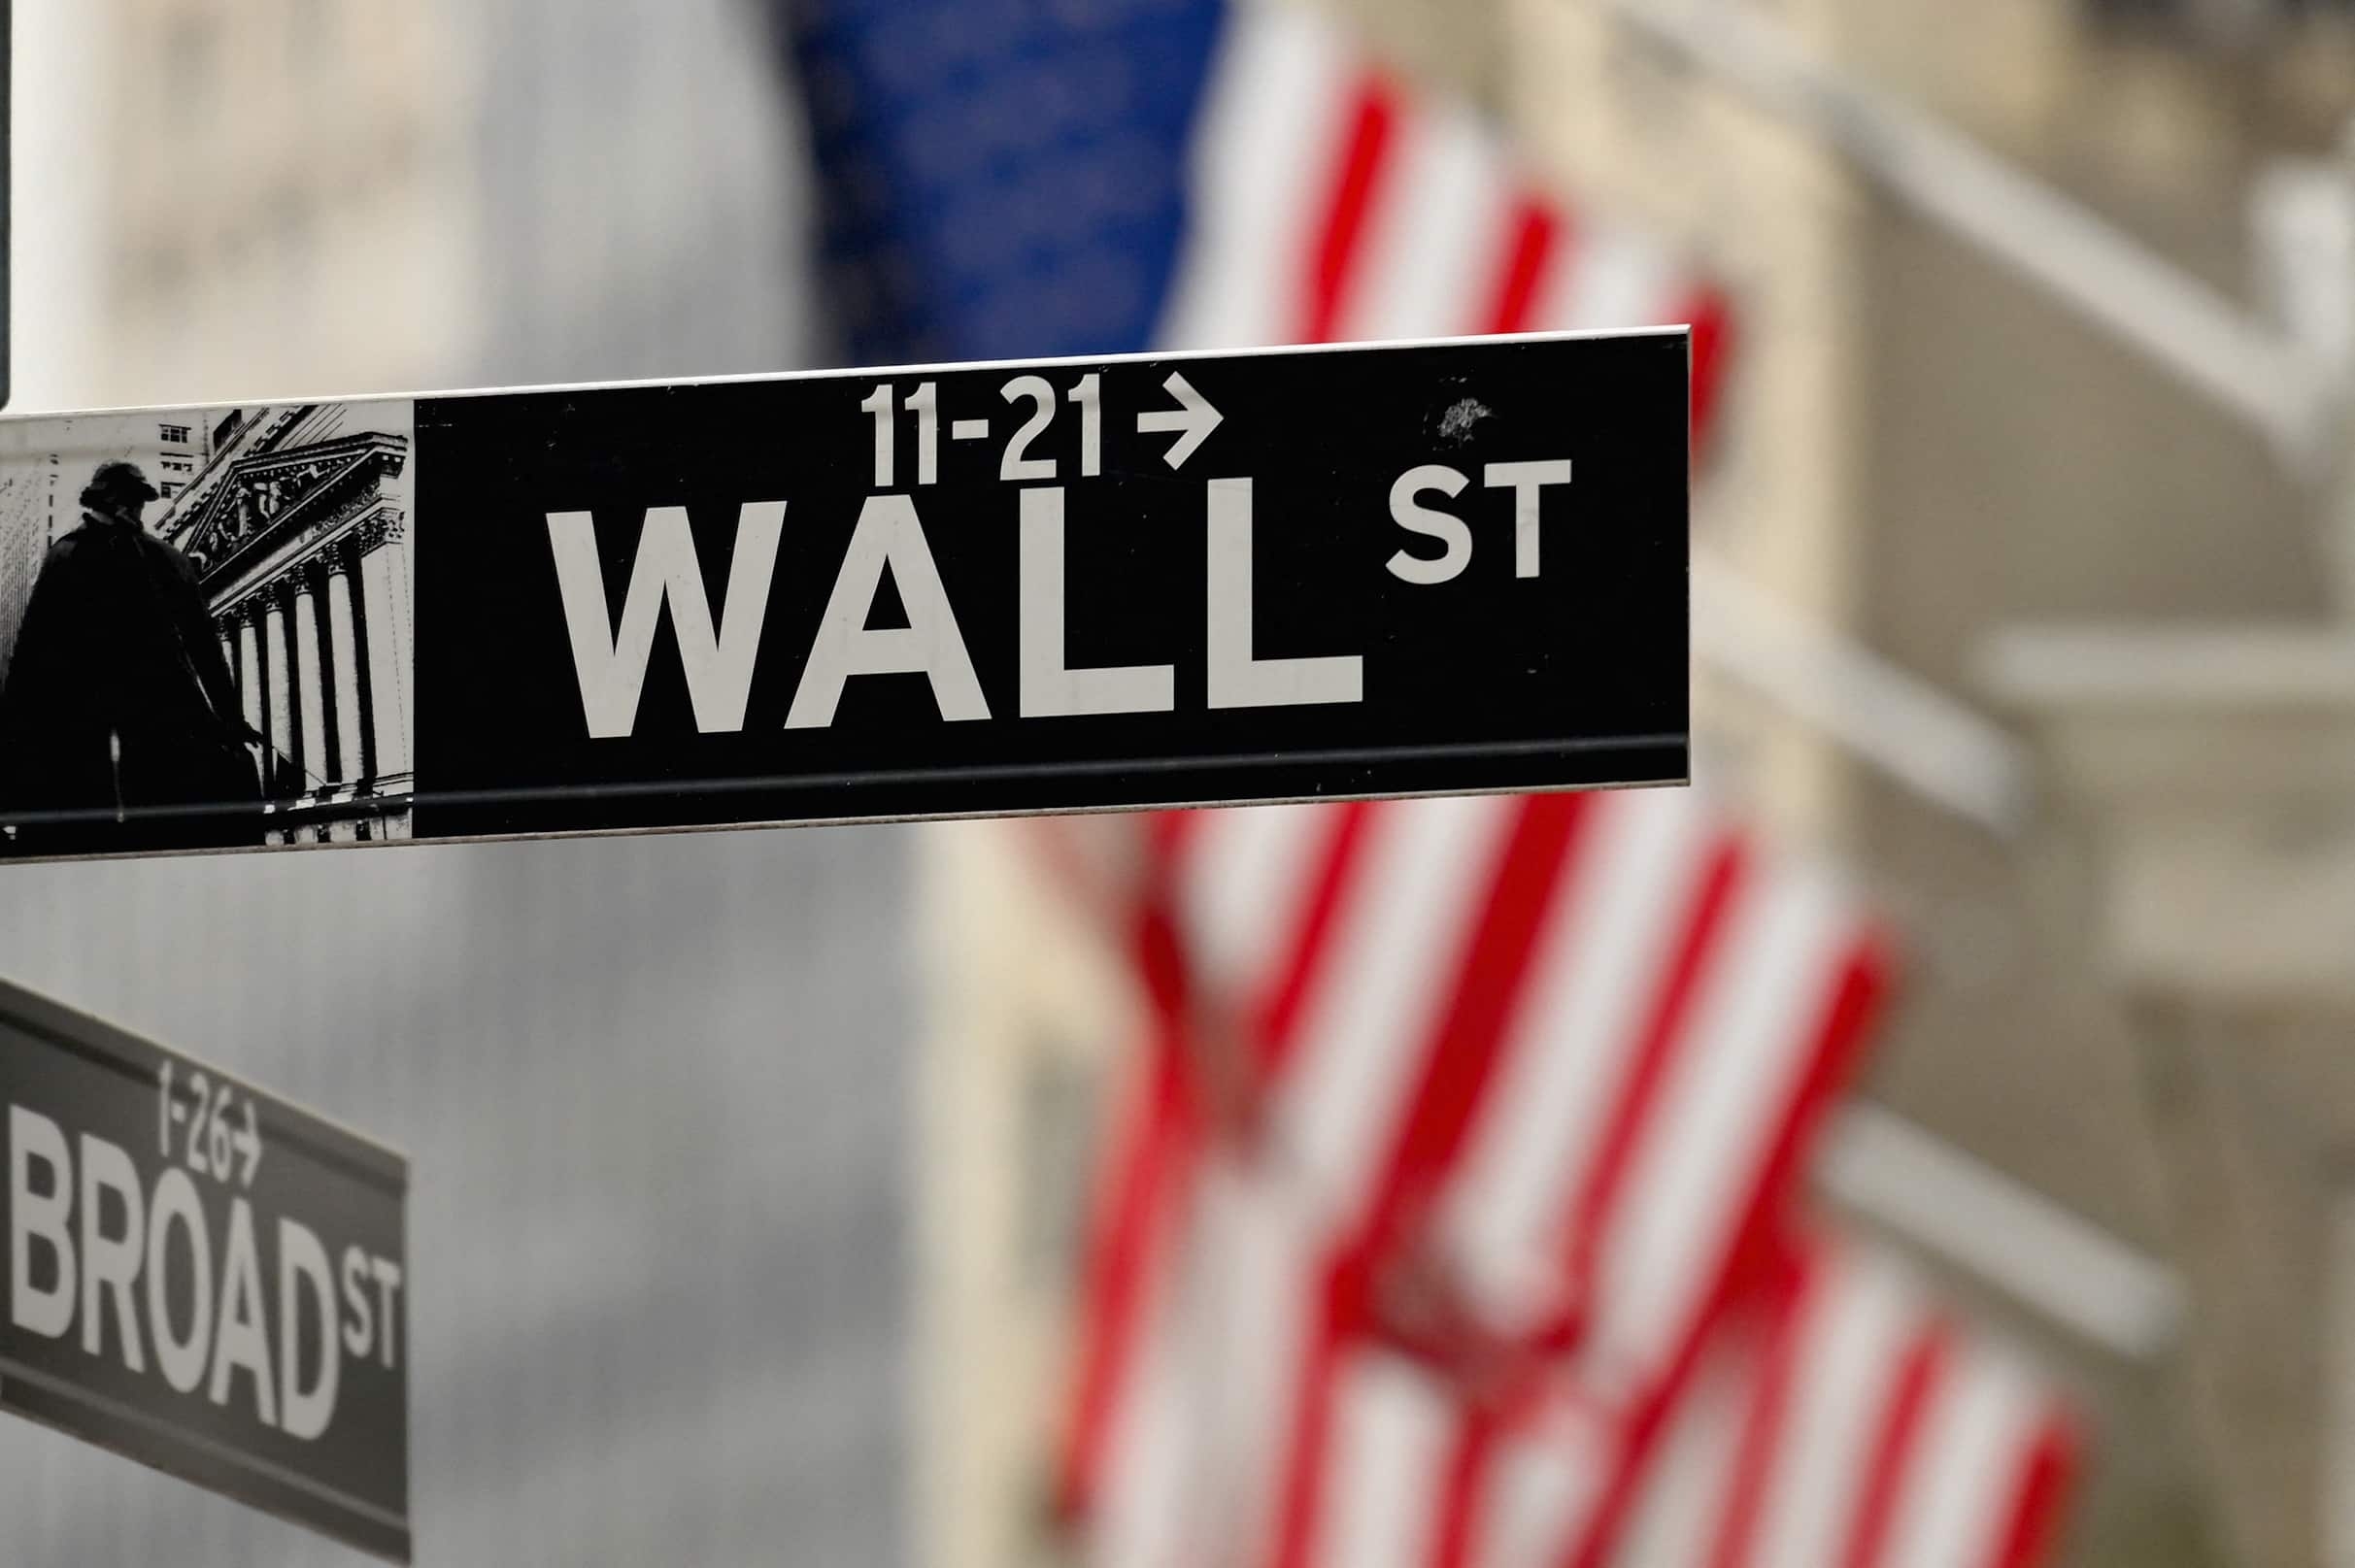 Wall Street's main indices fell sharply on Monday, with the Nasdaq Composite confirming it was in a bear market, as the prospect of a ban on oil imports from Russia sent crude prices soaring and fuelled concerns about rising inflation. Nasdaq ended down 20.1 percent from its November 19 record high close. The Dow Jones Industrial Average fell 797.42 points, or 2.37%, to 32,817.38, the S&amp;P 500 lost 127.79 points, or 2.95%, to 4,201.08 and the Nasdaq Composite dropped 482.48 points, or 3.62%, to 12,830.96.